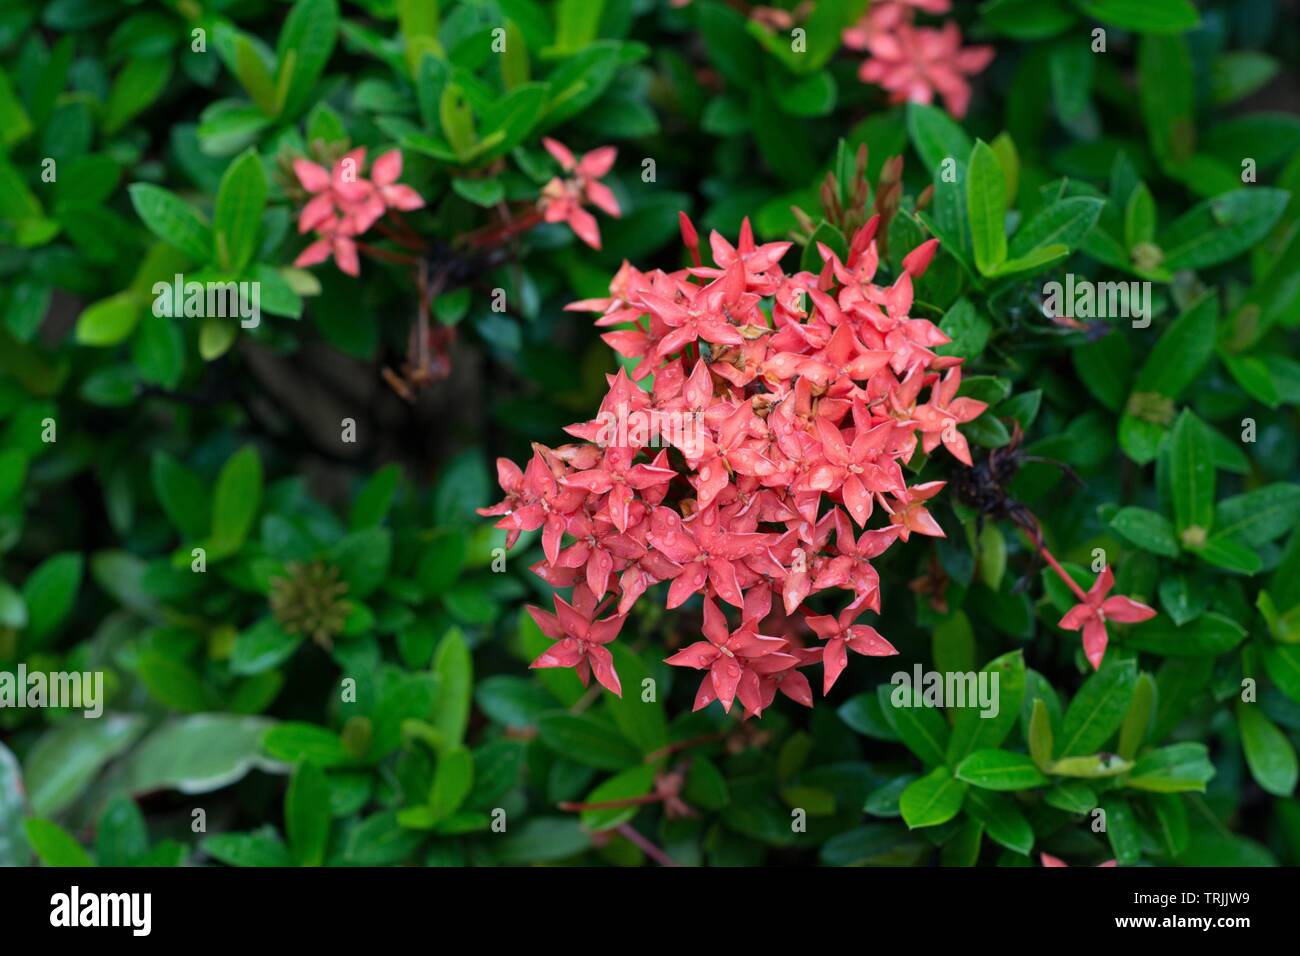 Kerala, India - April 25, 2019: Ixora coccinea is a species of flowering plant in the Rubiaceae family Stock Photo